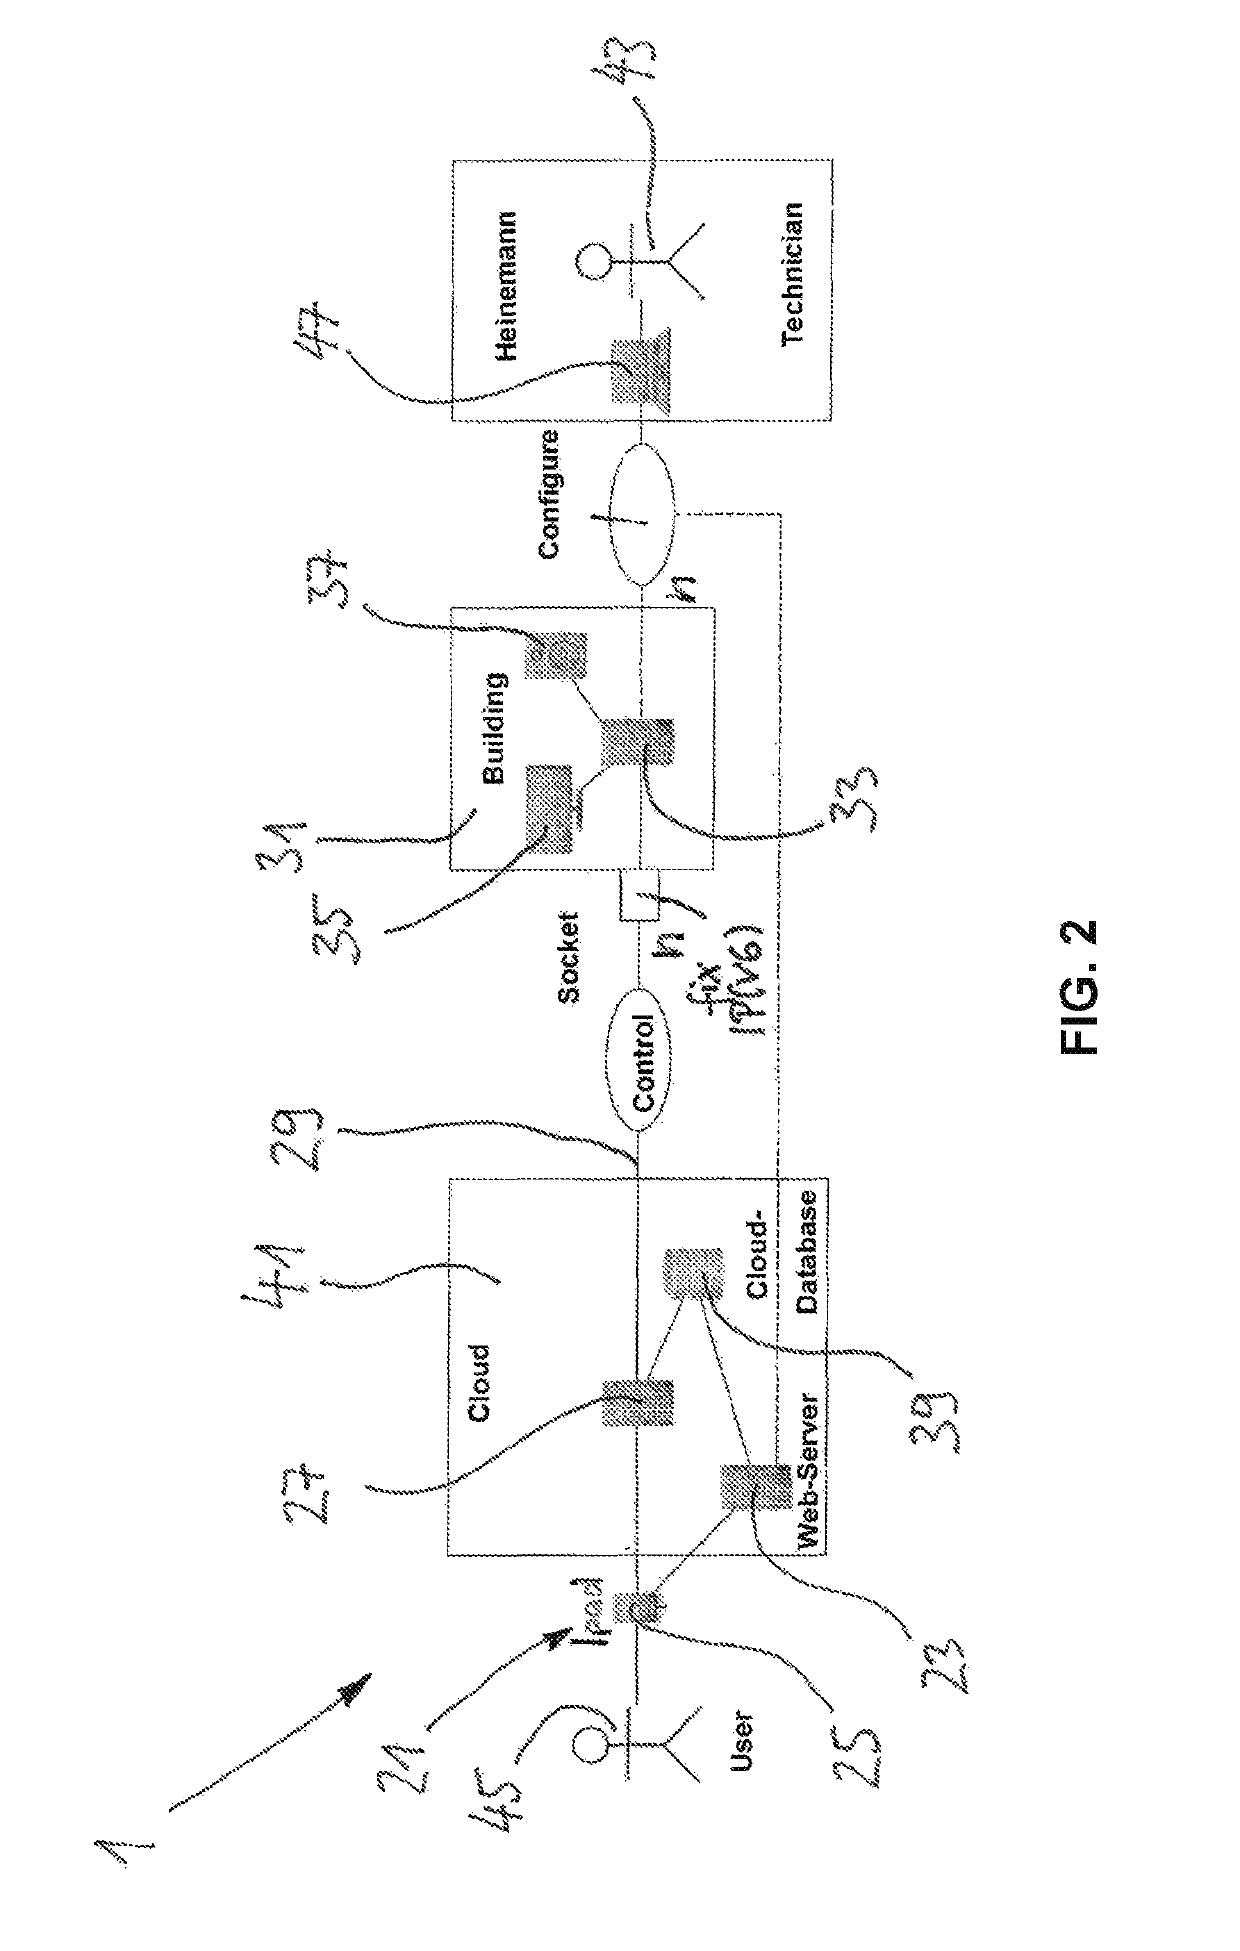 Arrangement and method for controlling electronically controllable devices and systems in public and private buildings